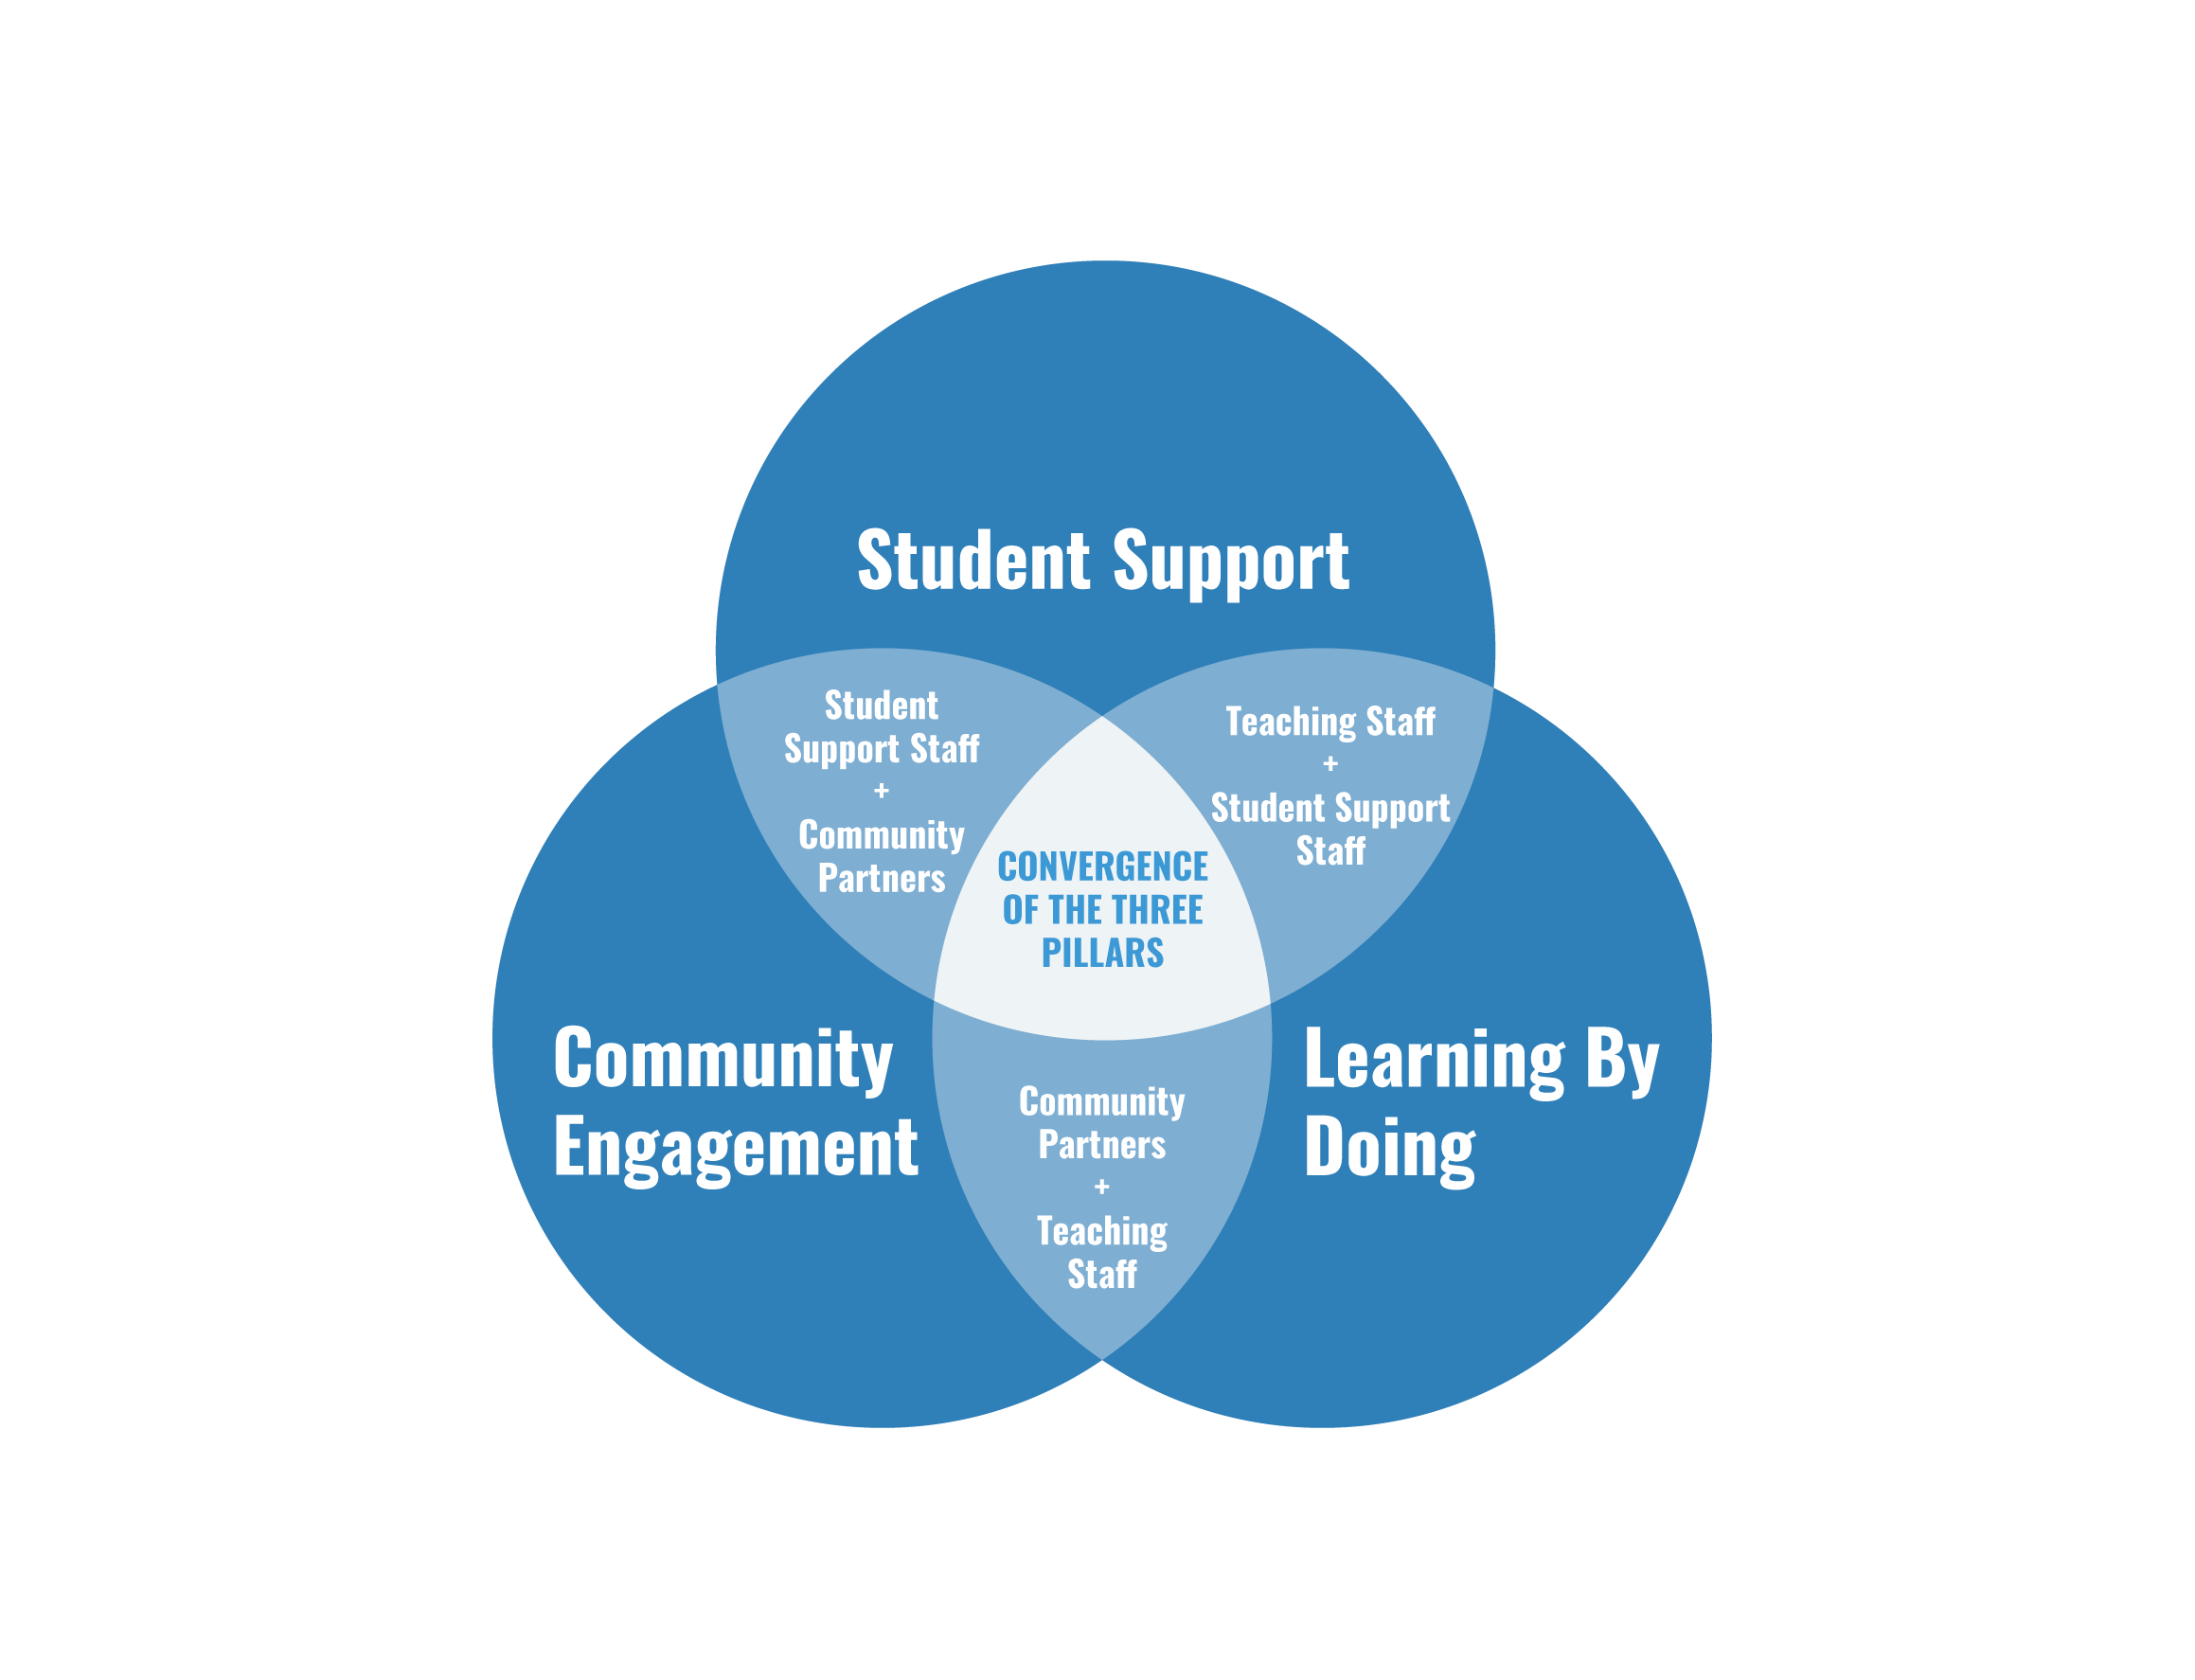 Infographic about the three pillars, reach out to info@futurefocusededucation.org for more information